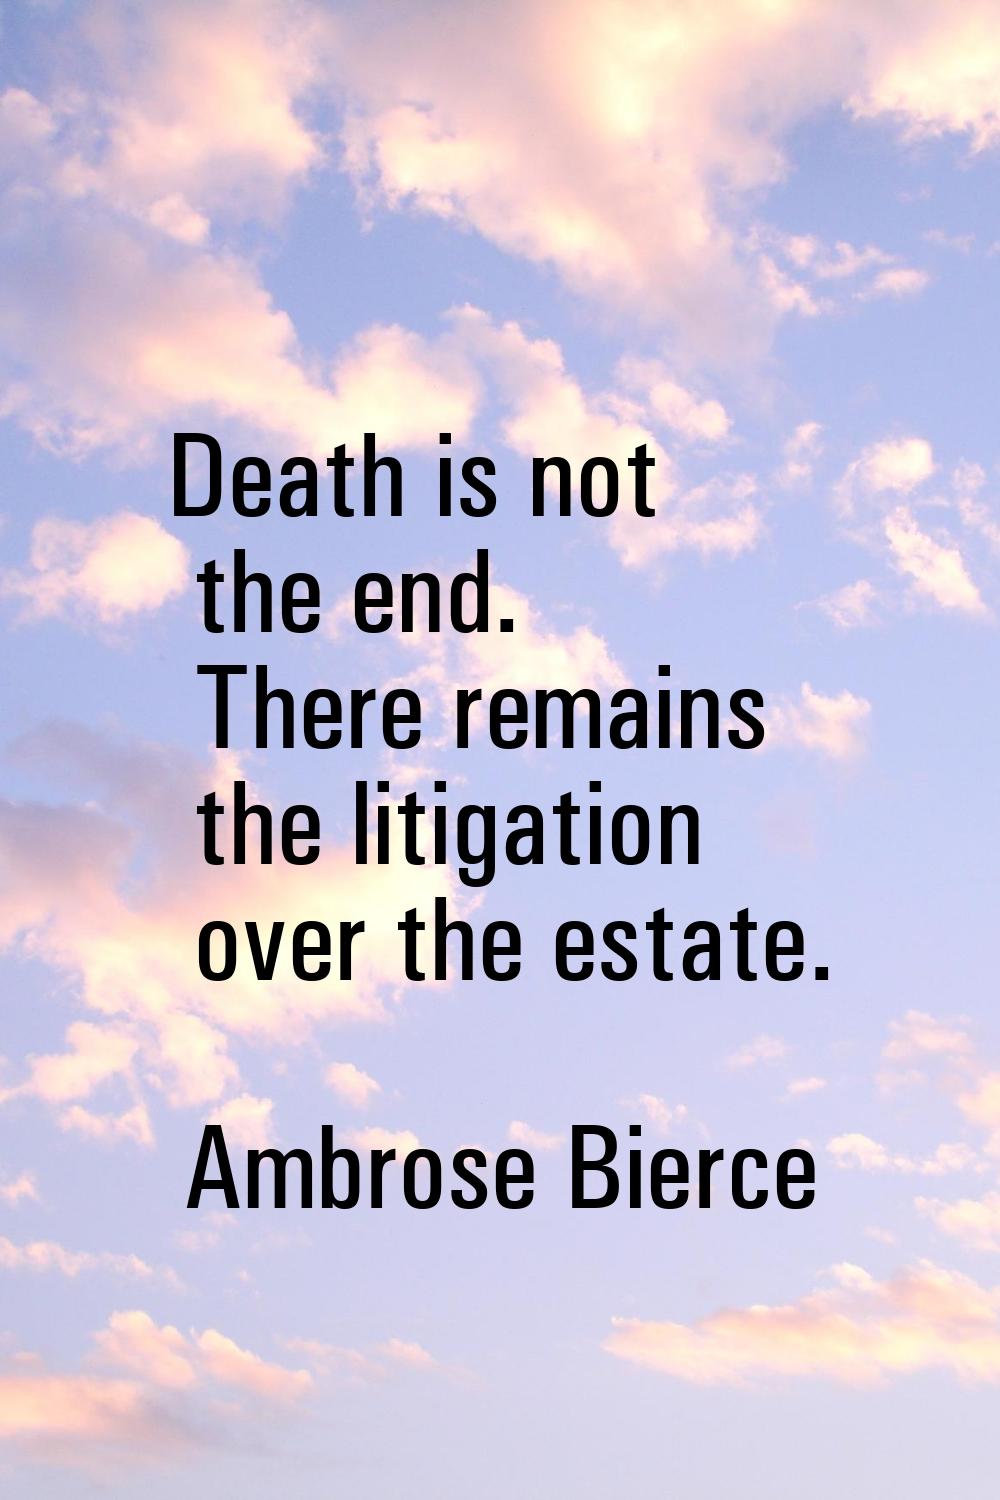 Death is not the end. There remains the litigation over the estate.